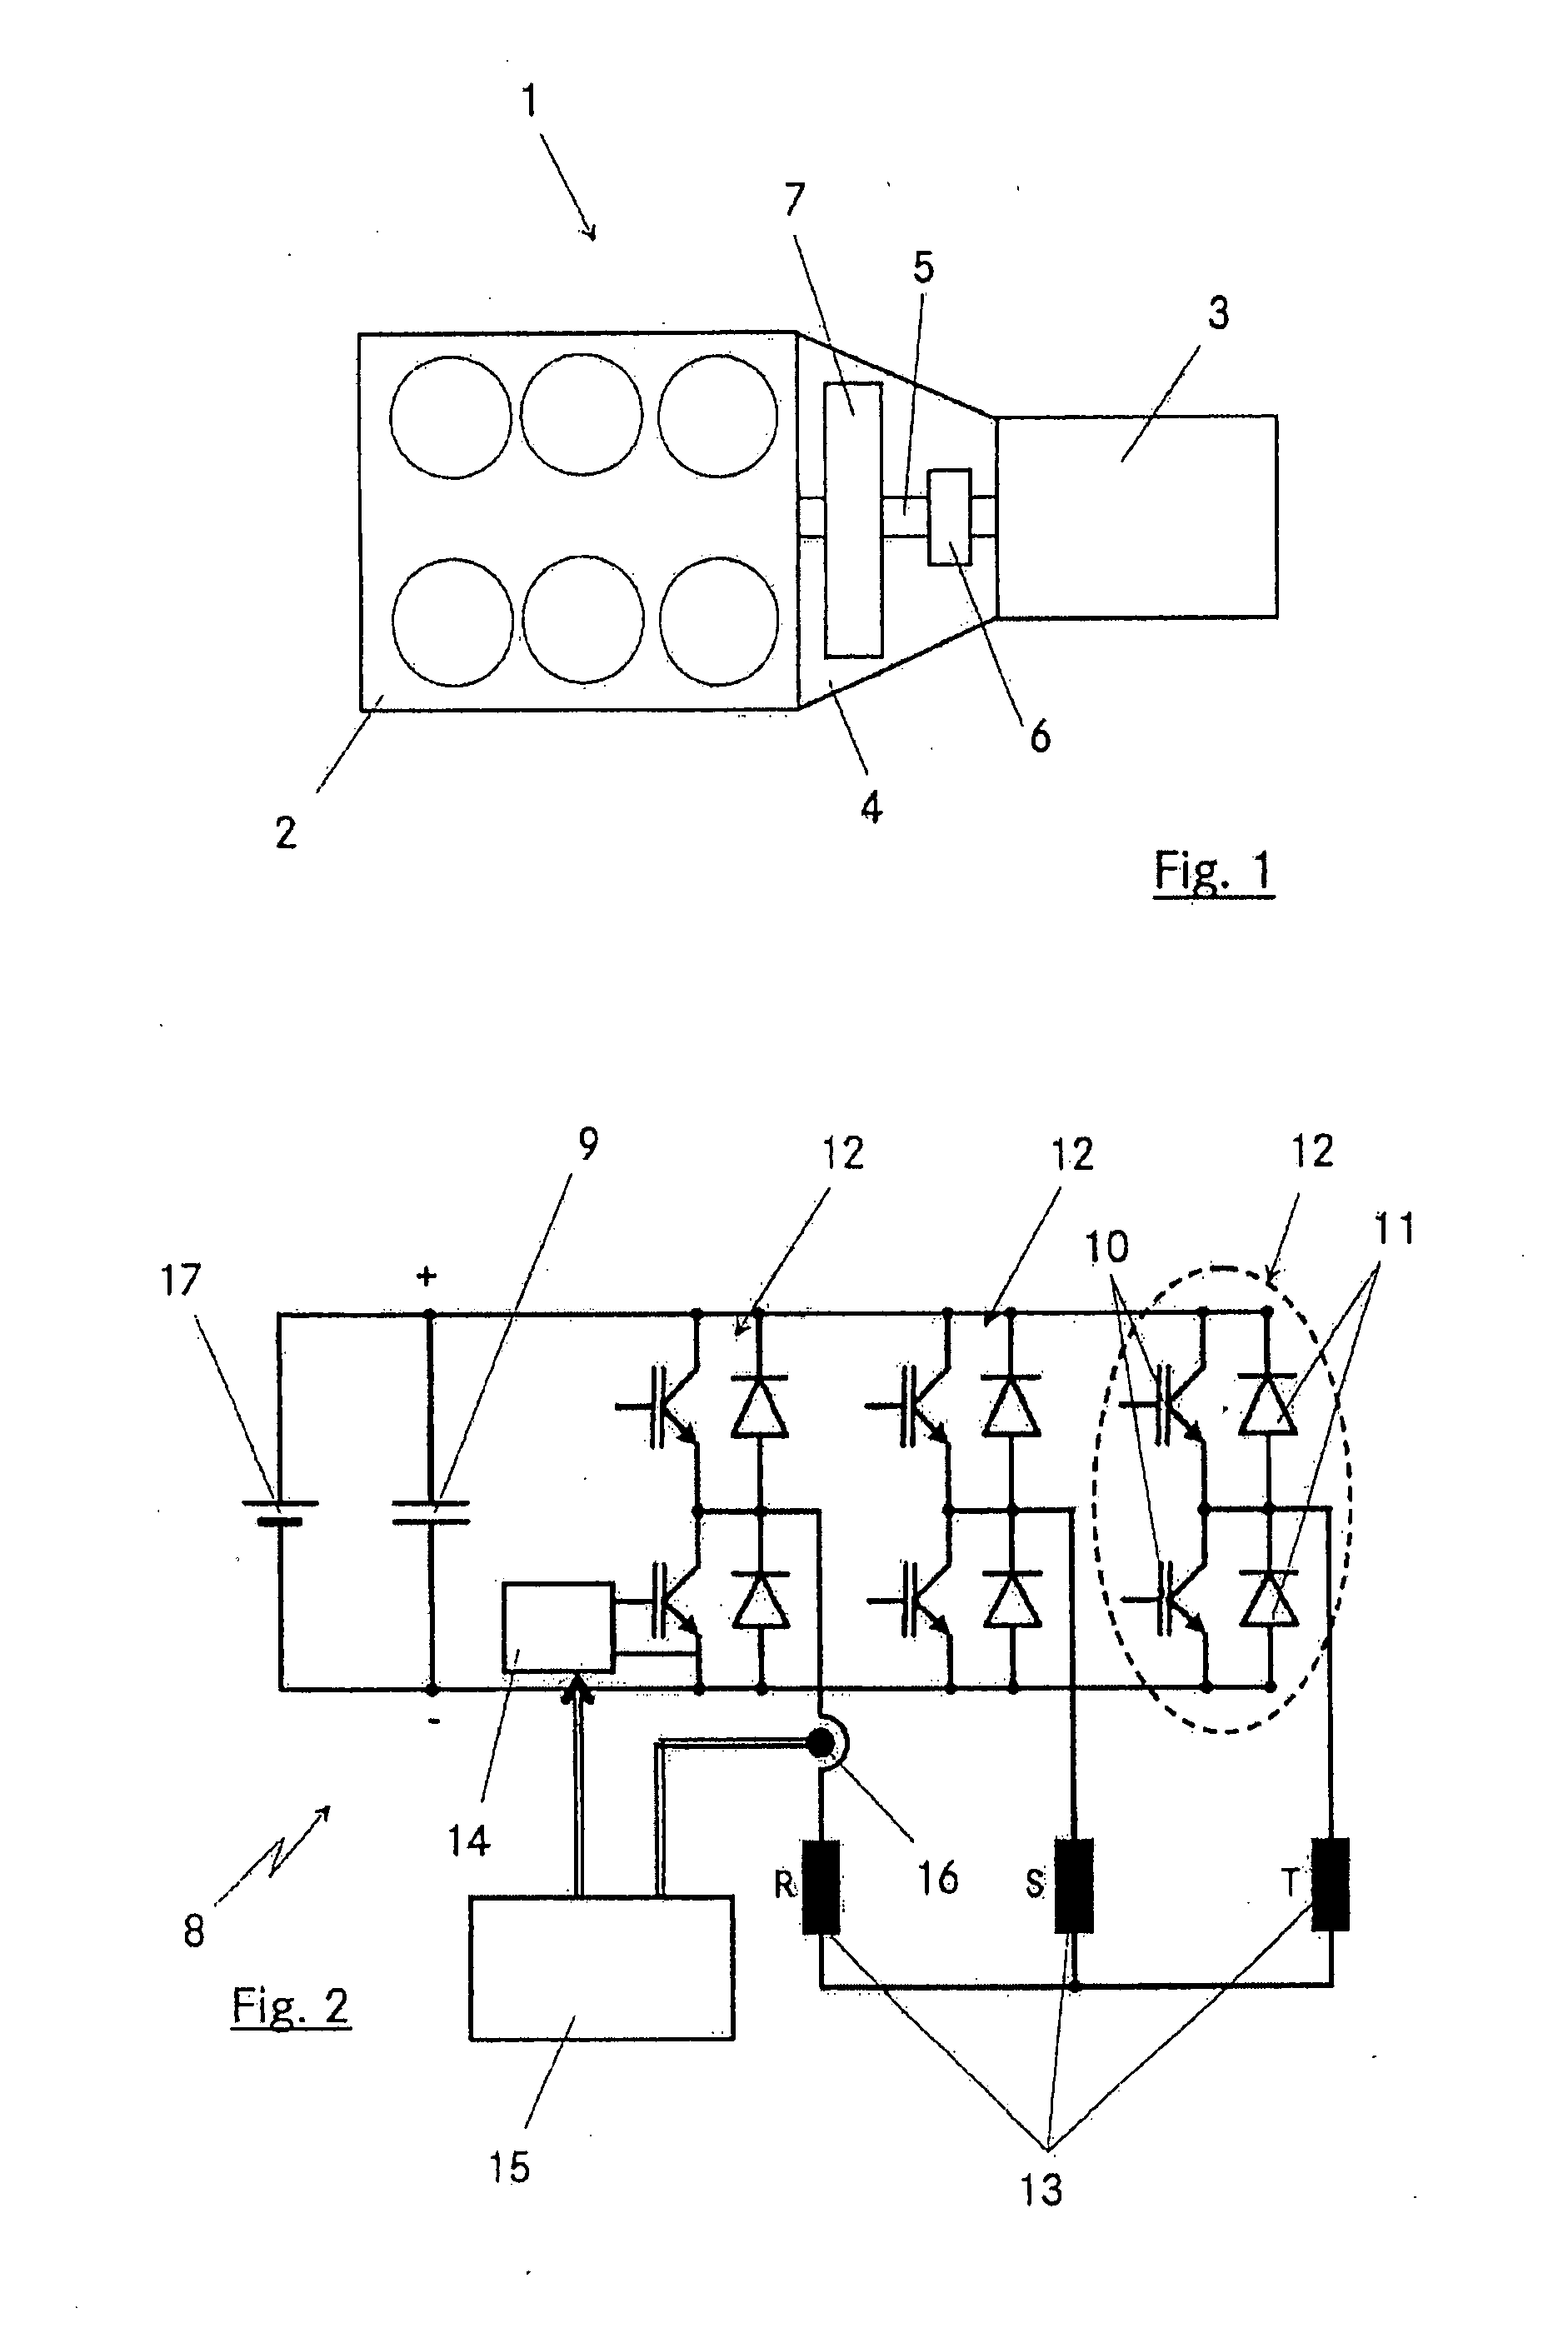 Drive train for a motor vehicle comprising an electric machine